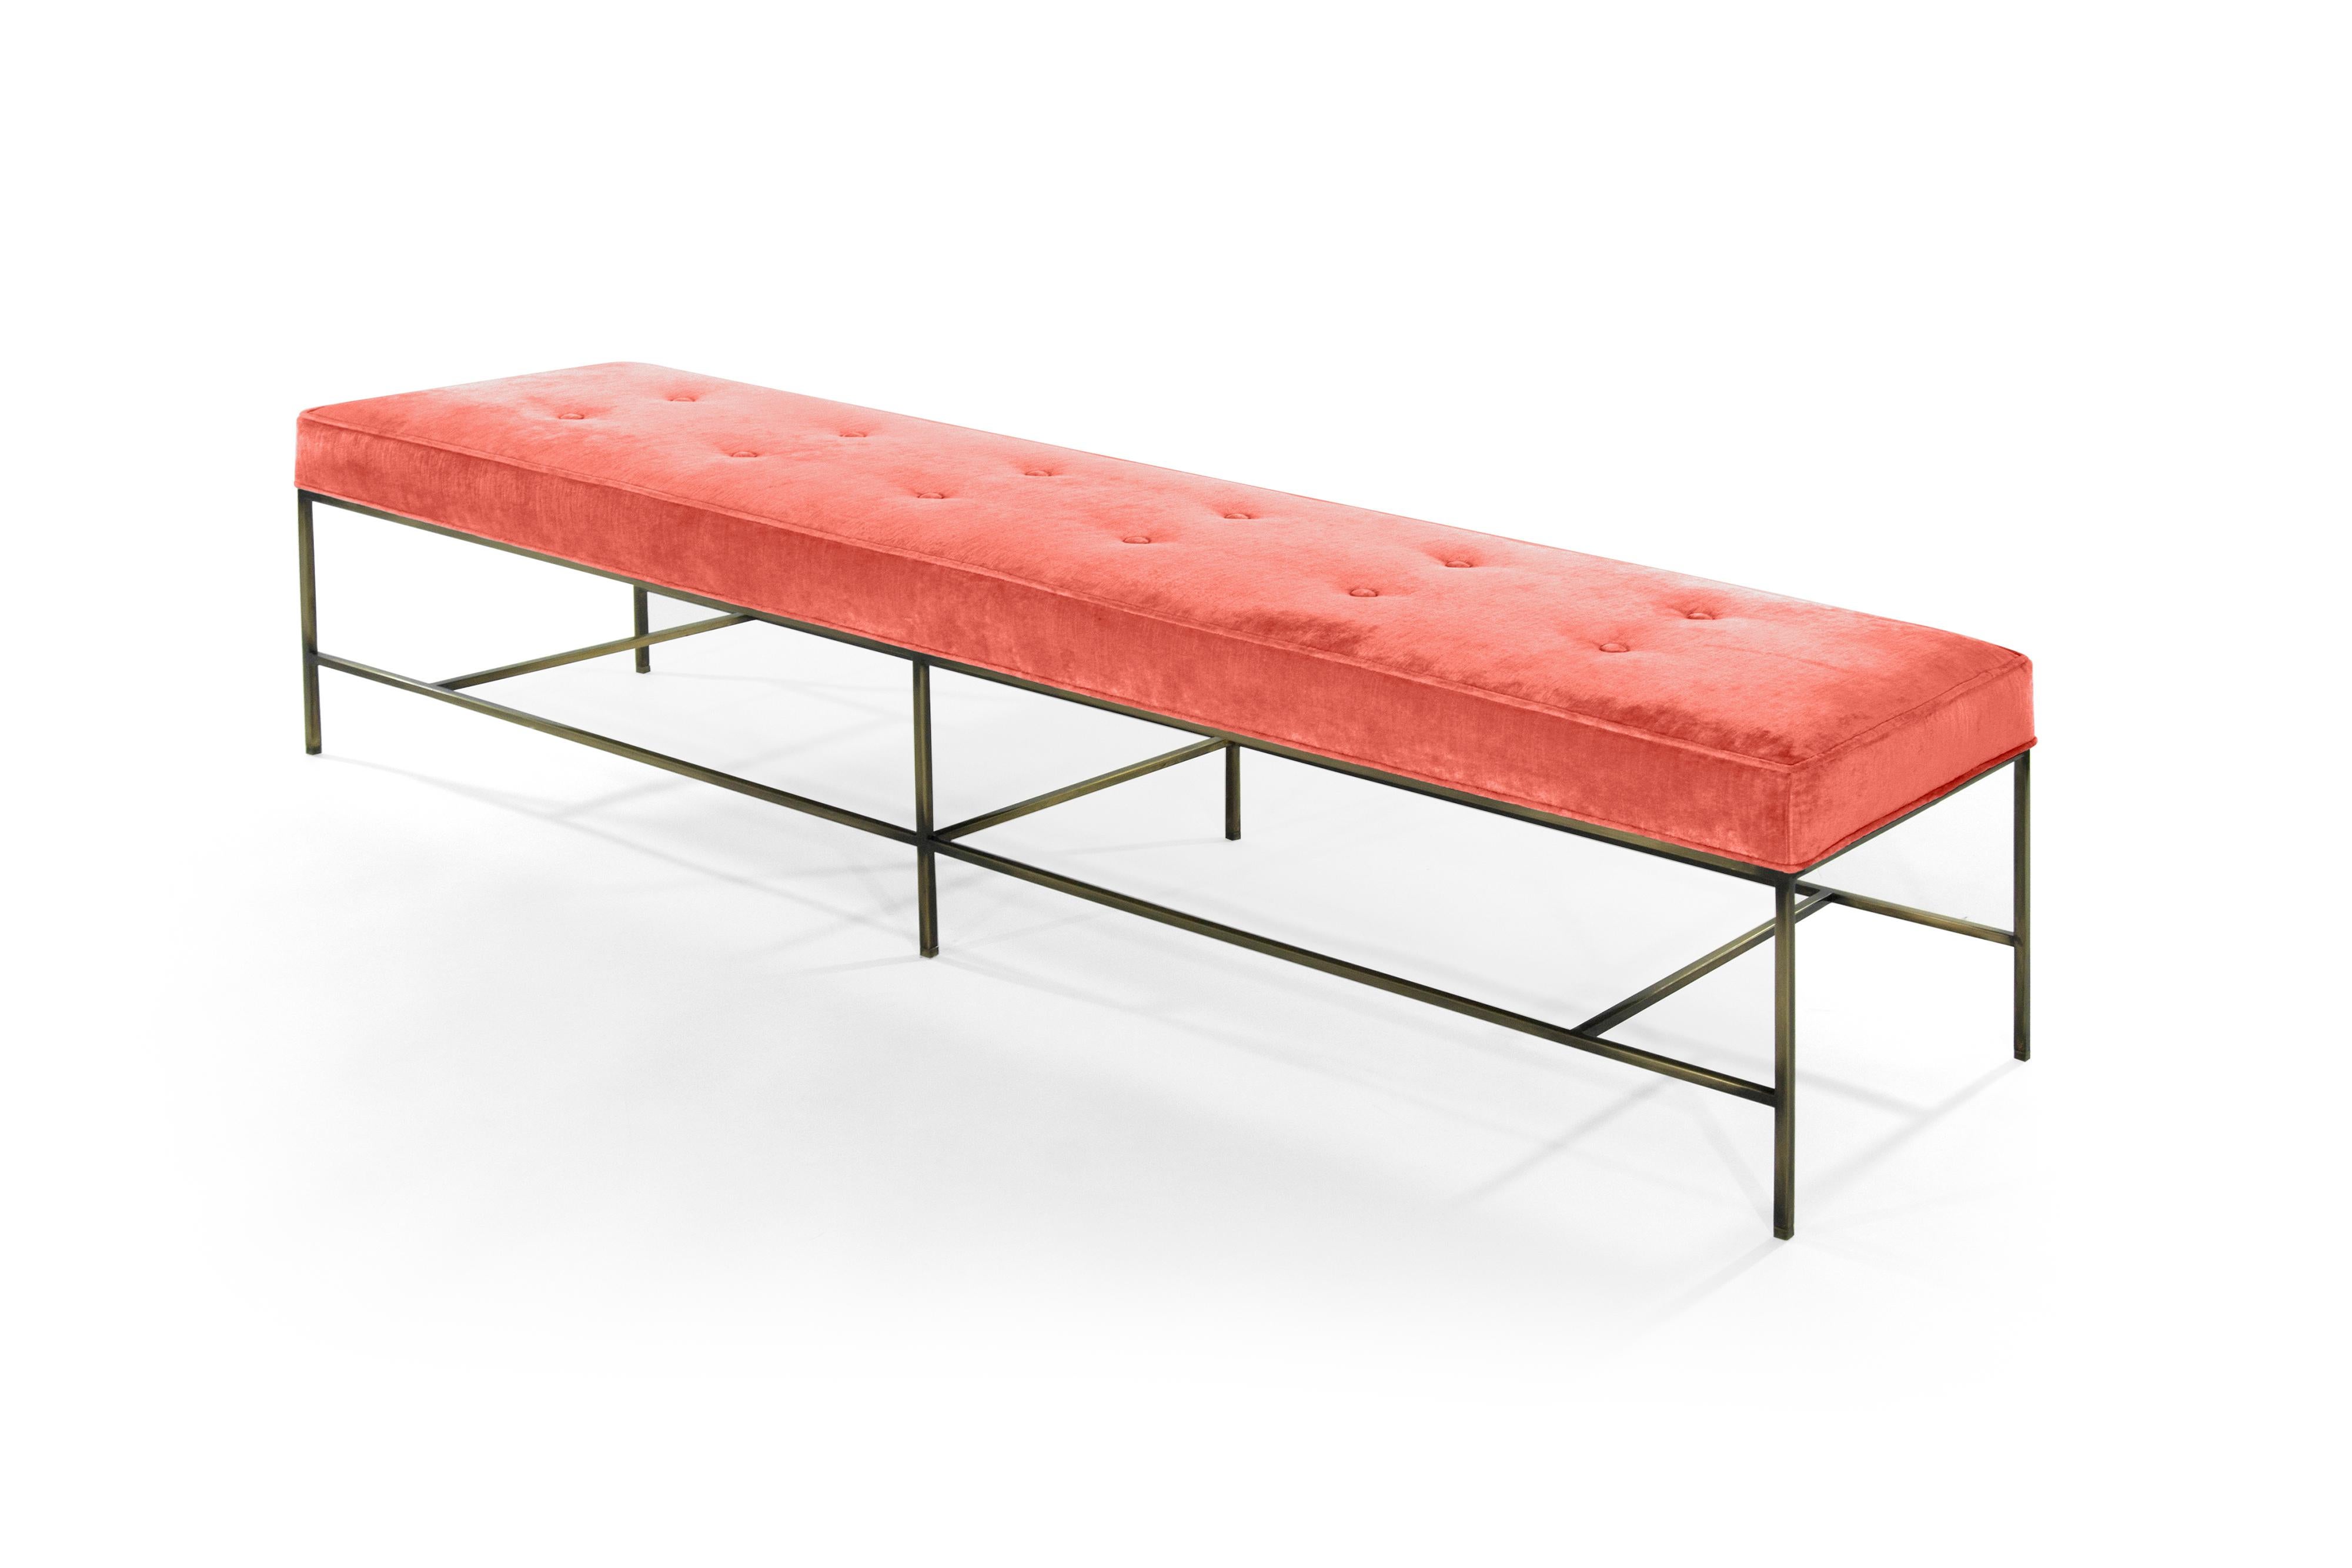 The Architectural Bench is light and angular with impeccable lines. The extra-long cushion upholstered in colorful coral chenille is uplifted with a bronze frame. Paul McCobb’s design influence shines through with masterful minimalism. Slender legs